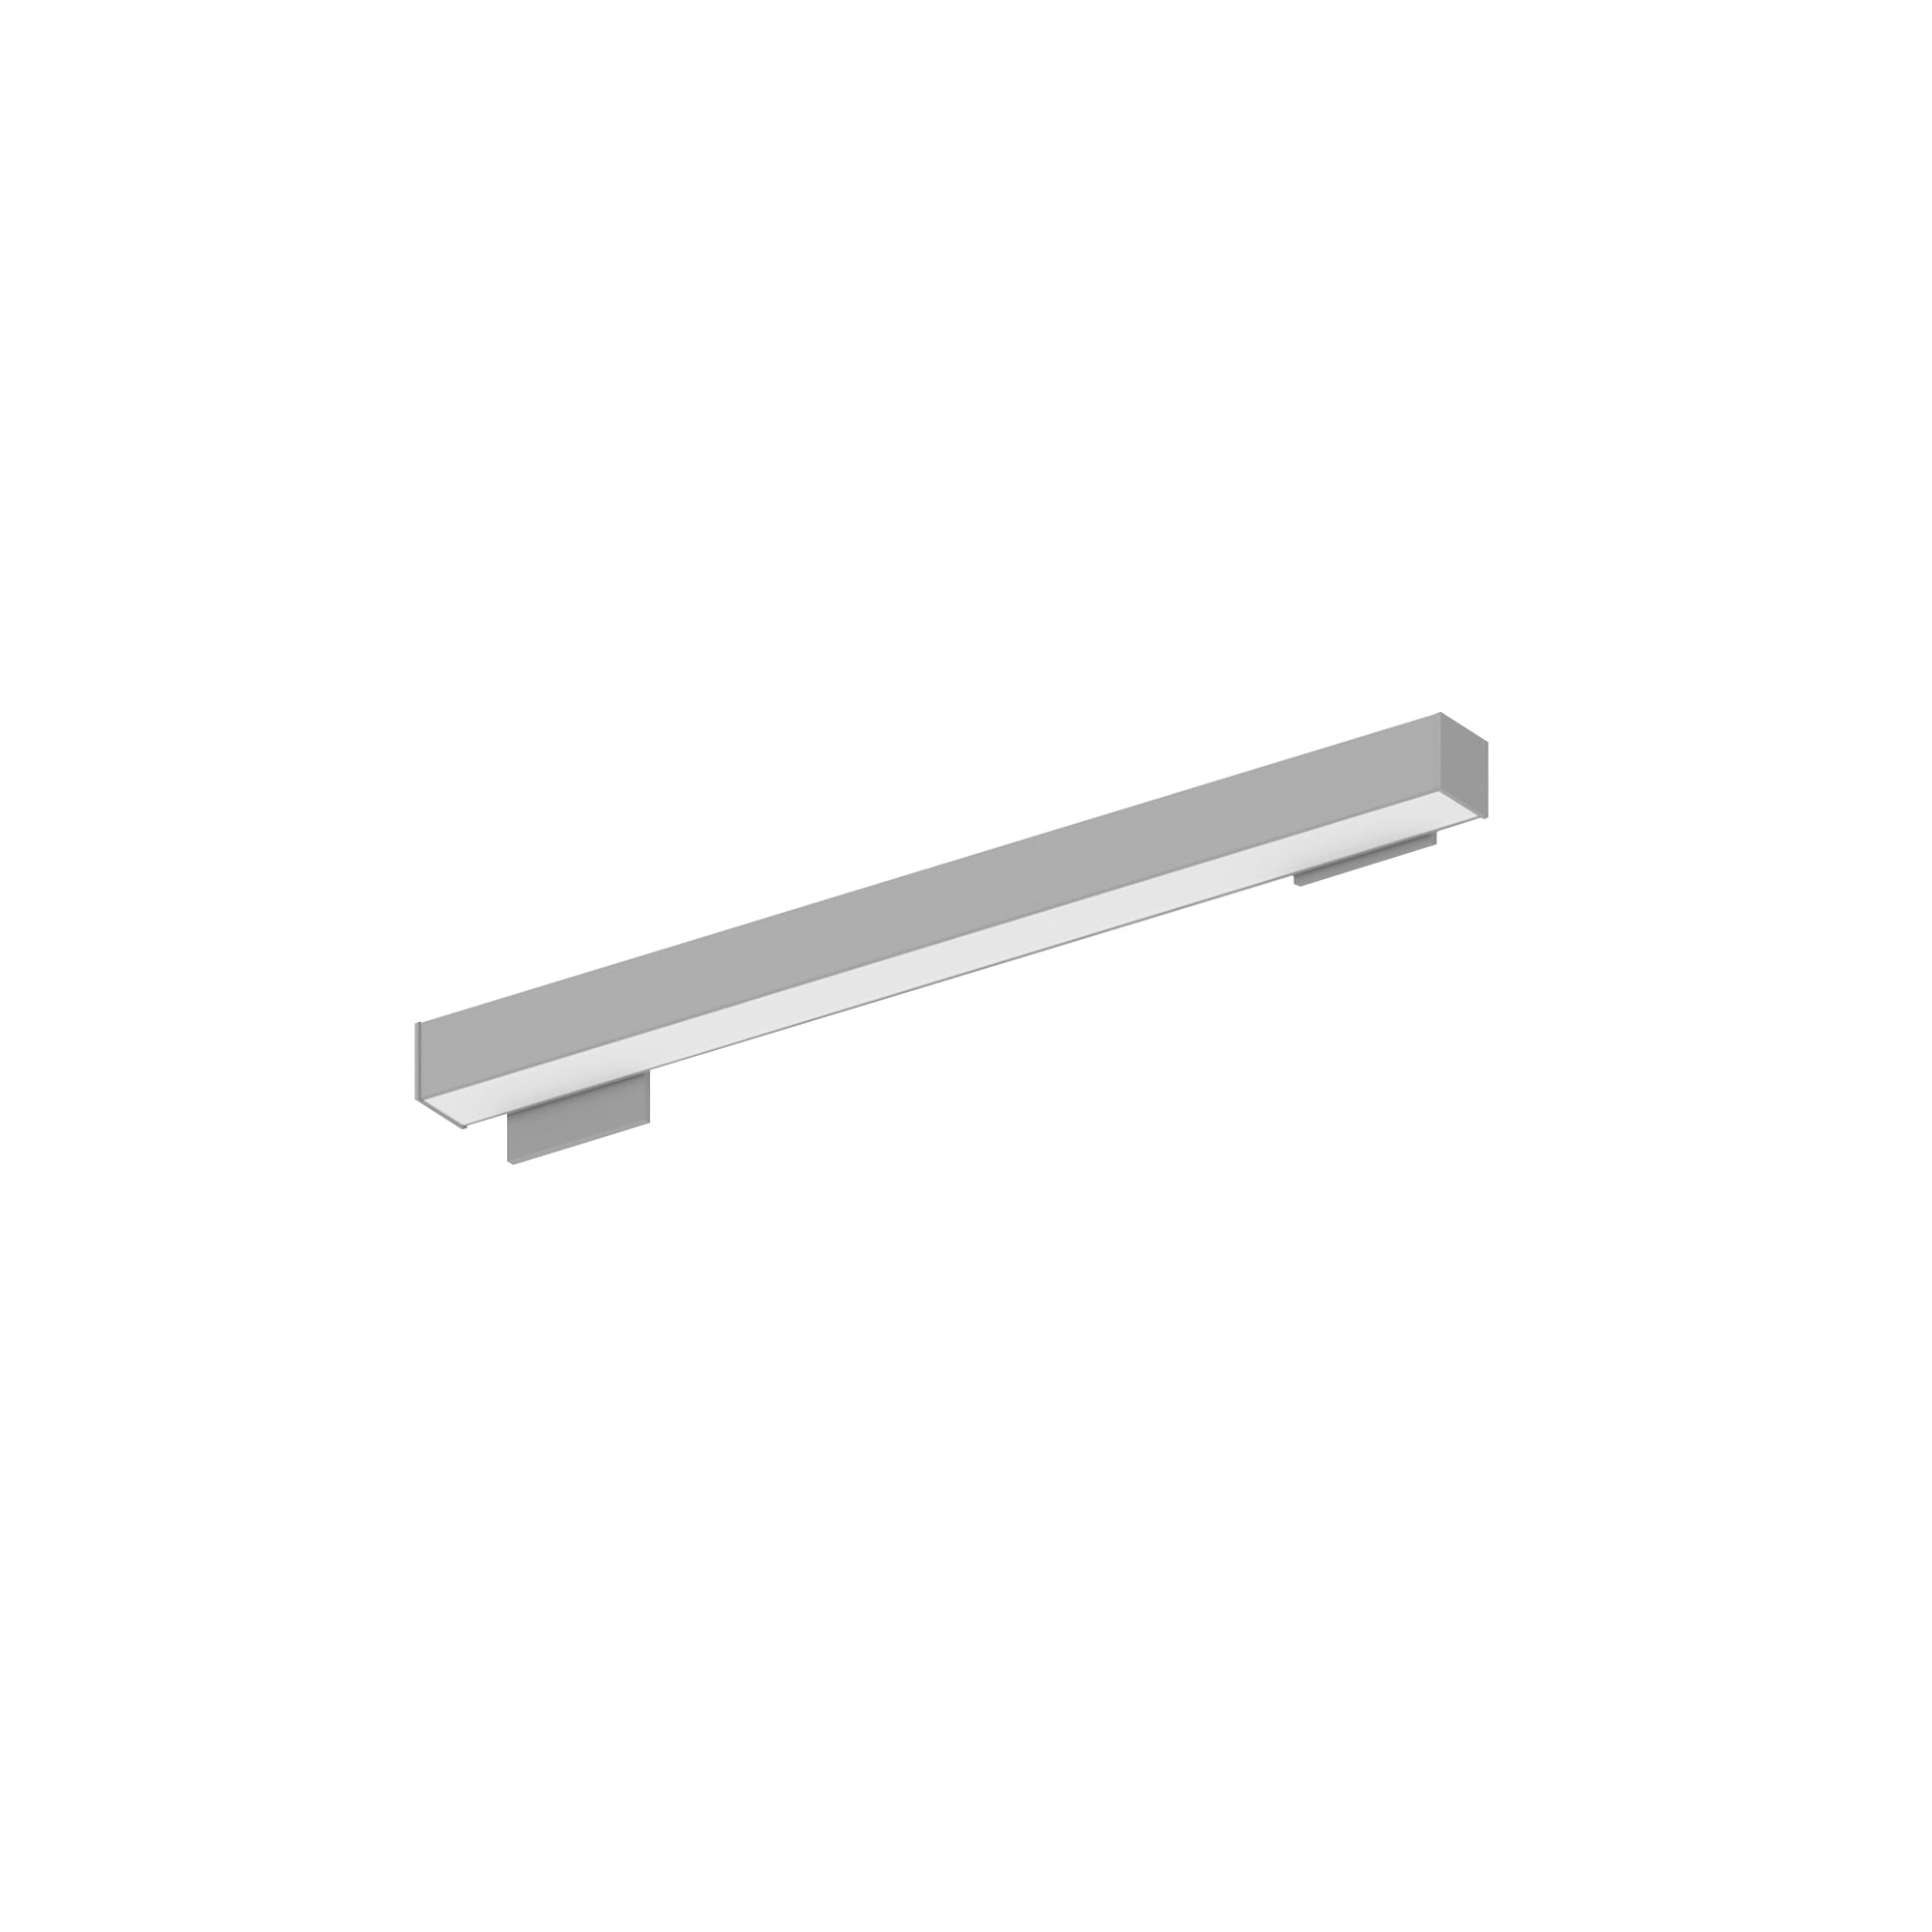 Nora Lighting NWLIN-21030A/L4-R2P - Linear - 2' L-Line LED Wall Mount Linear, 2100lm / 3000K, 4 Inchx4 Inch Left Plate & 2 Inchx4 Inch Right Plate, Right Power Feed, Aluminum Finish